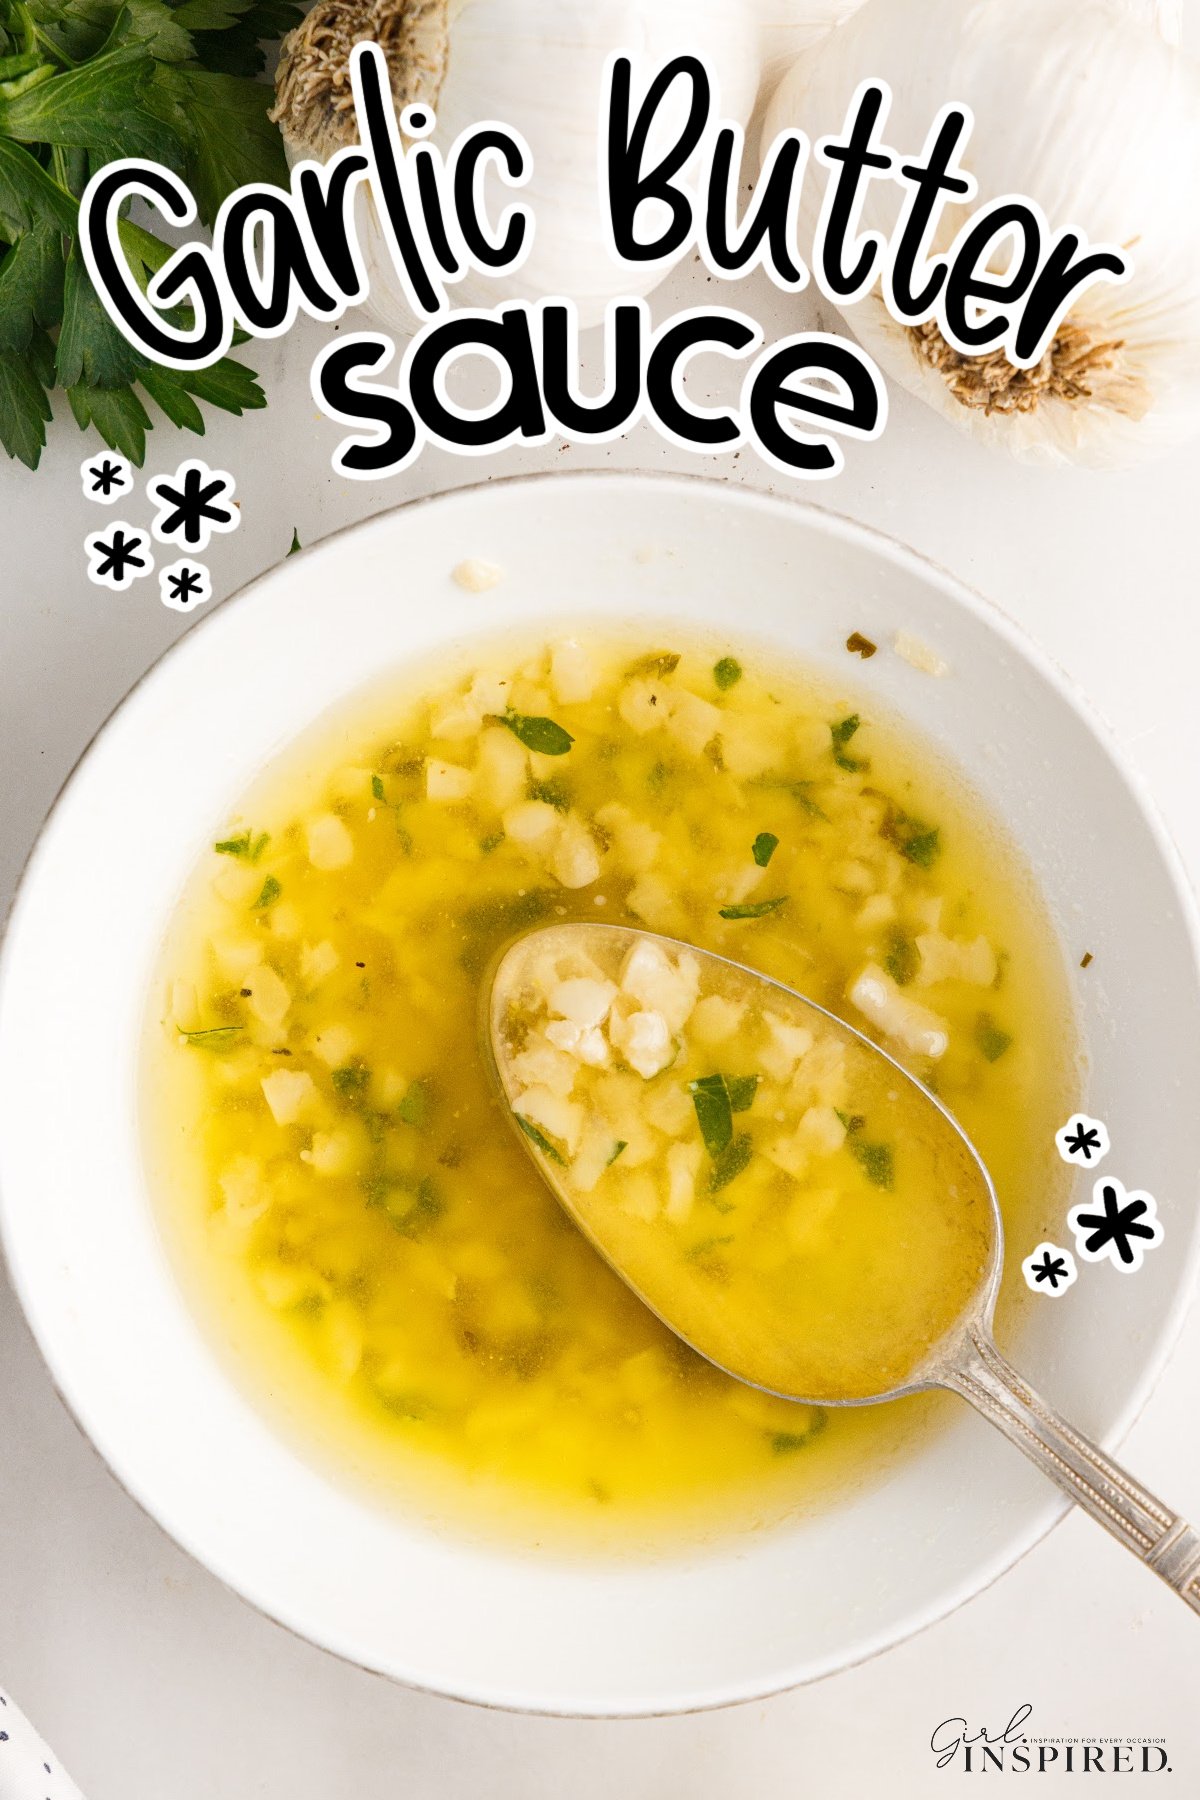 Garlic Butter Sauce in a bowl and some on a spoon with text overlay.